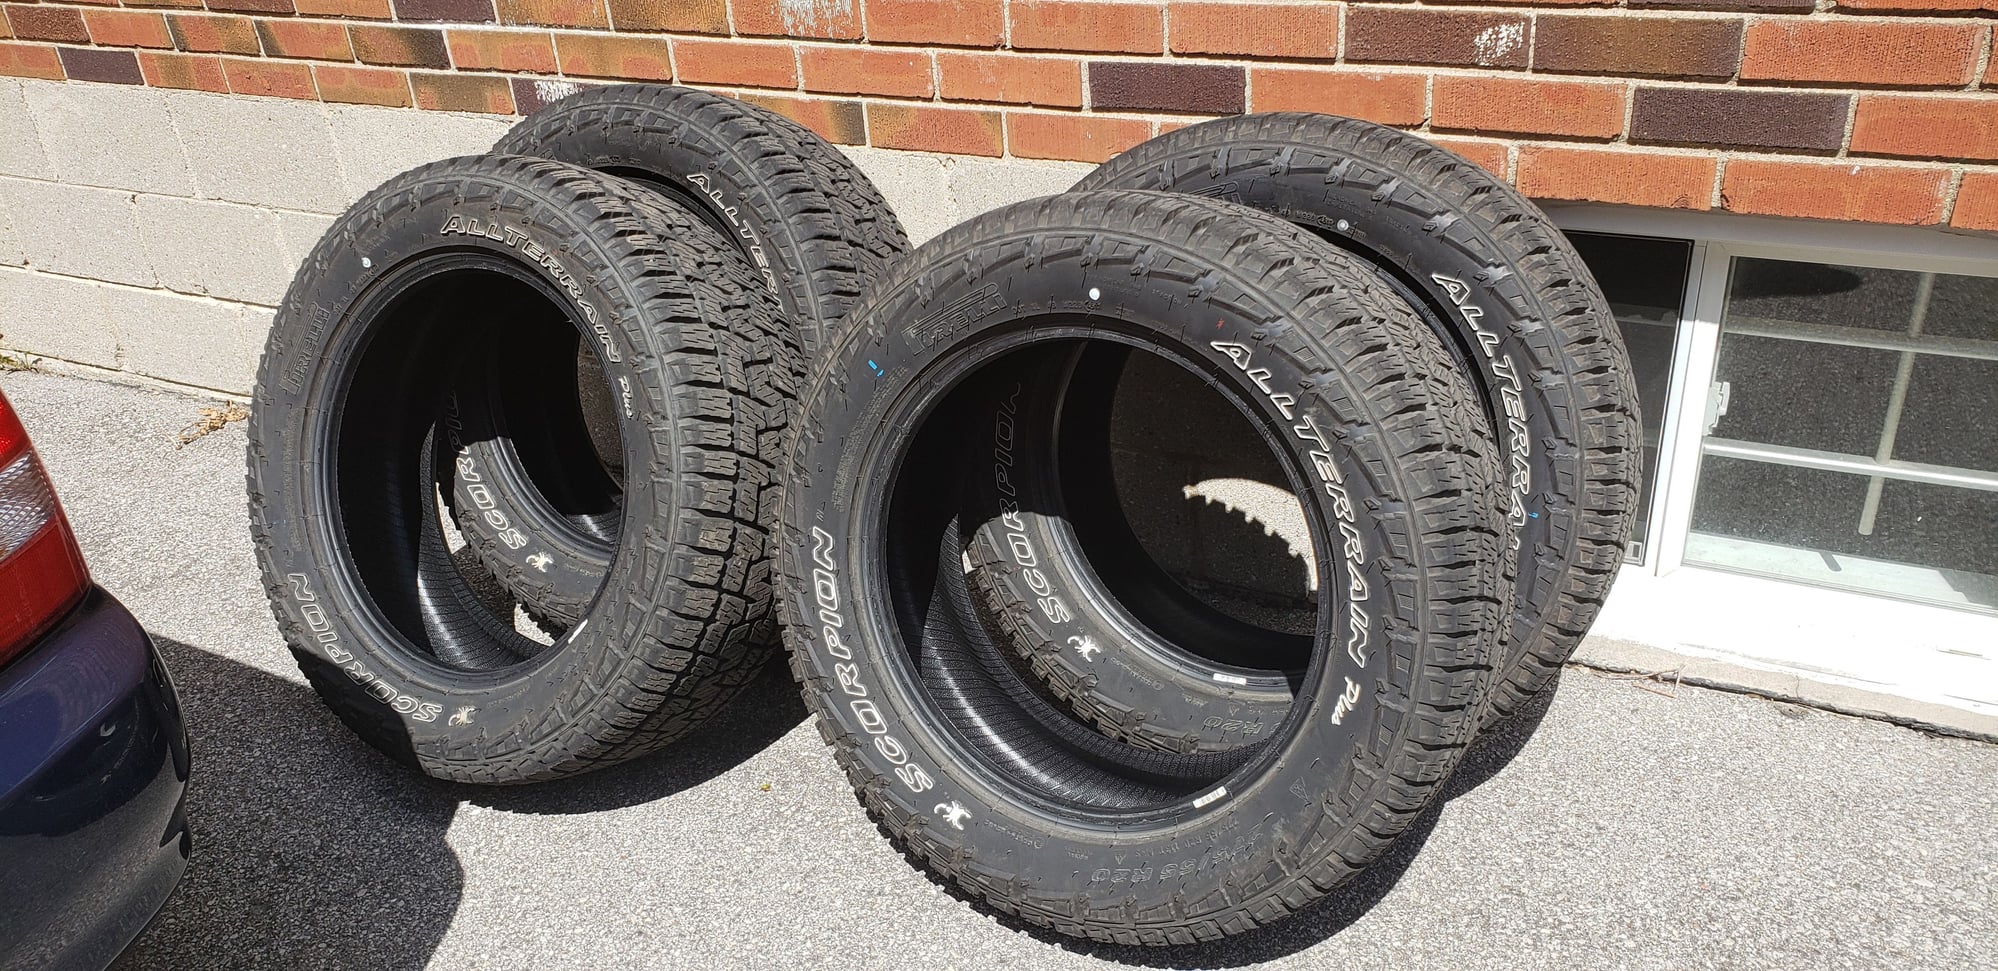 - Fans Ford 5 replacement Truck Page F150 - - Community Forum tires? Ford of Good